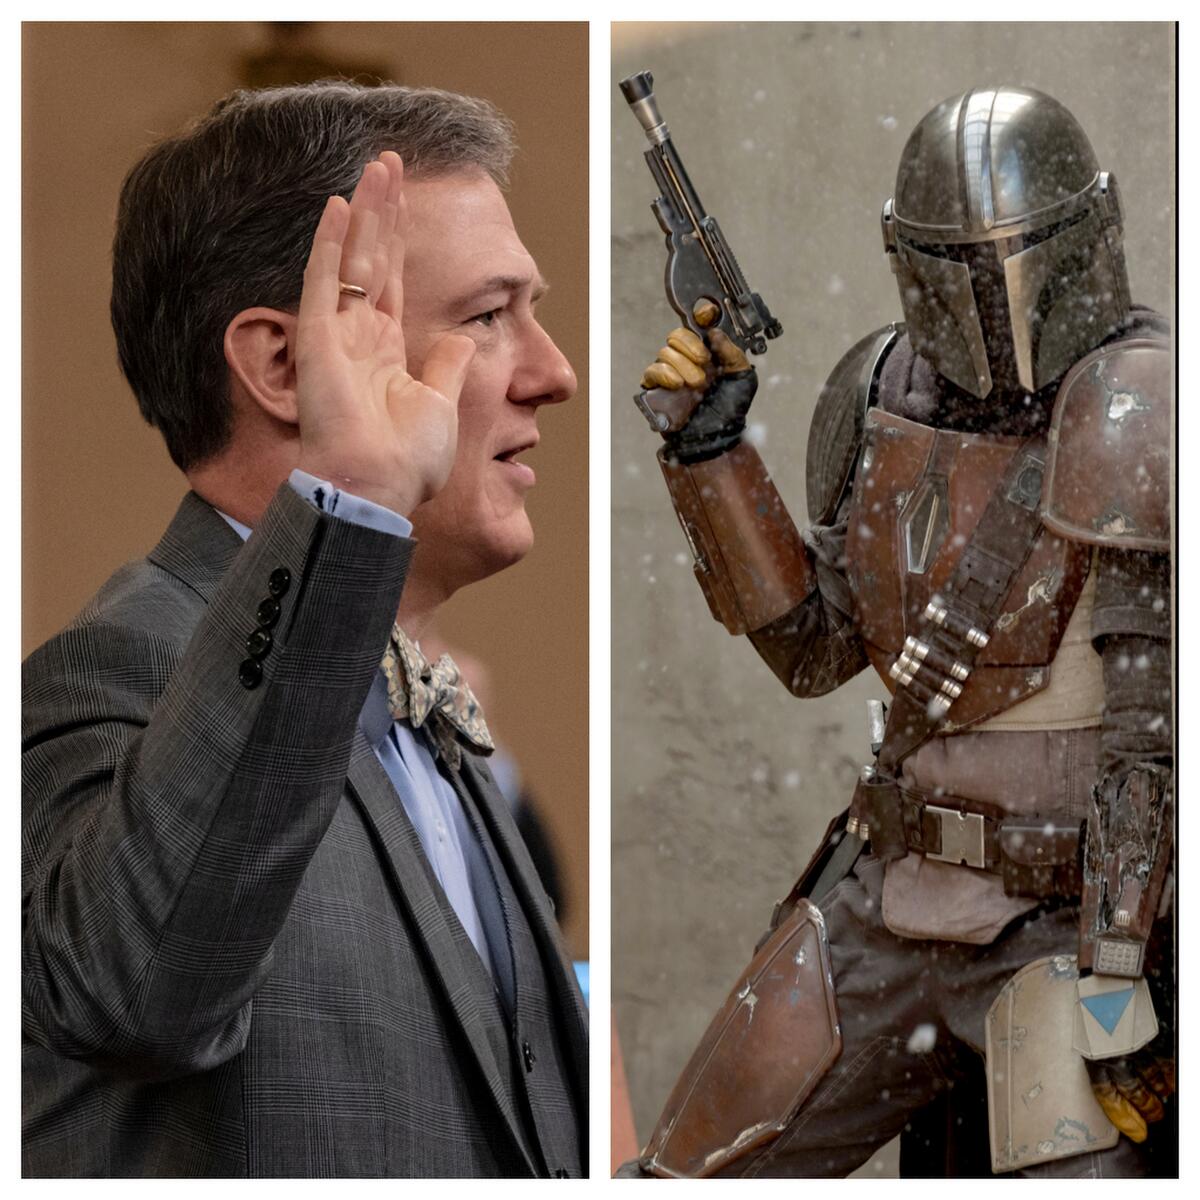 George Kent, left, is sworn in to testify during impeachment hearings in Washington. Disney+ offers an alternative with its Mandalorian series.